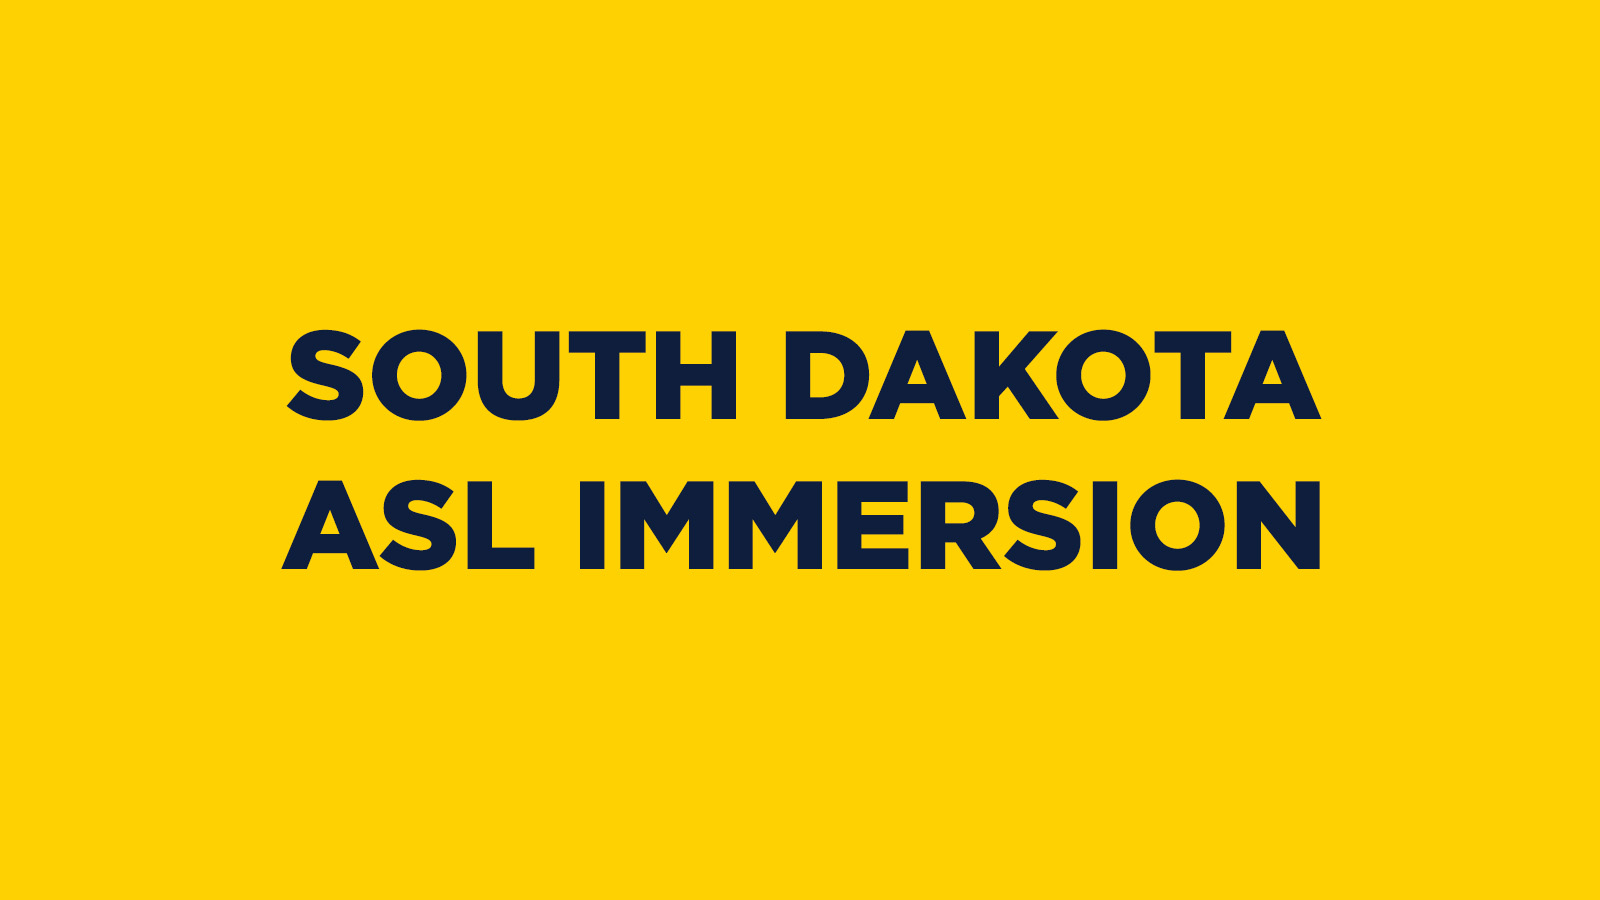 SD ASL IMMERSION